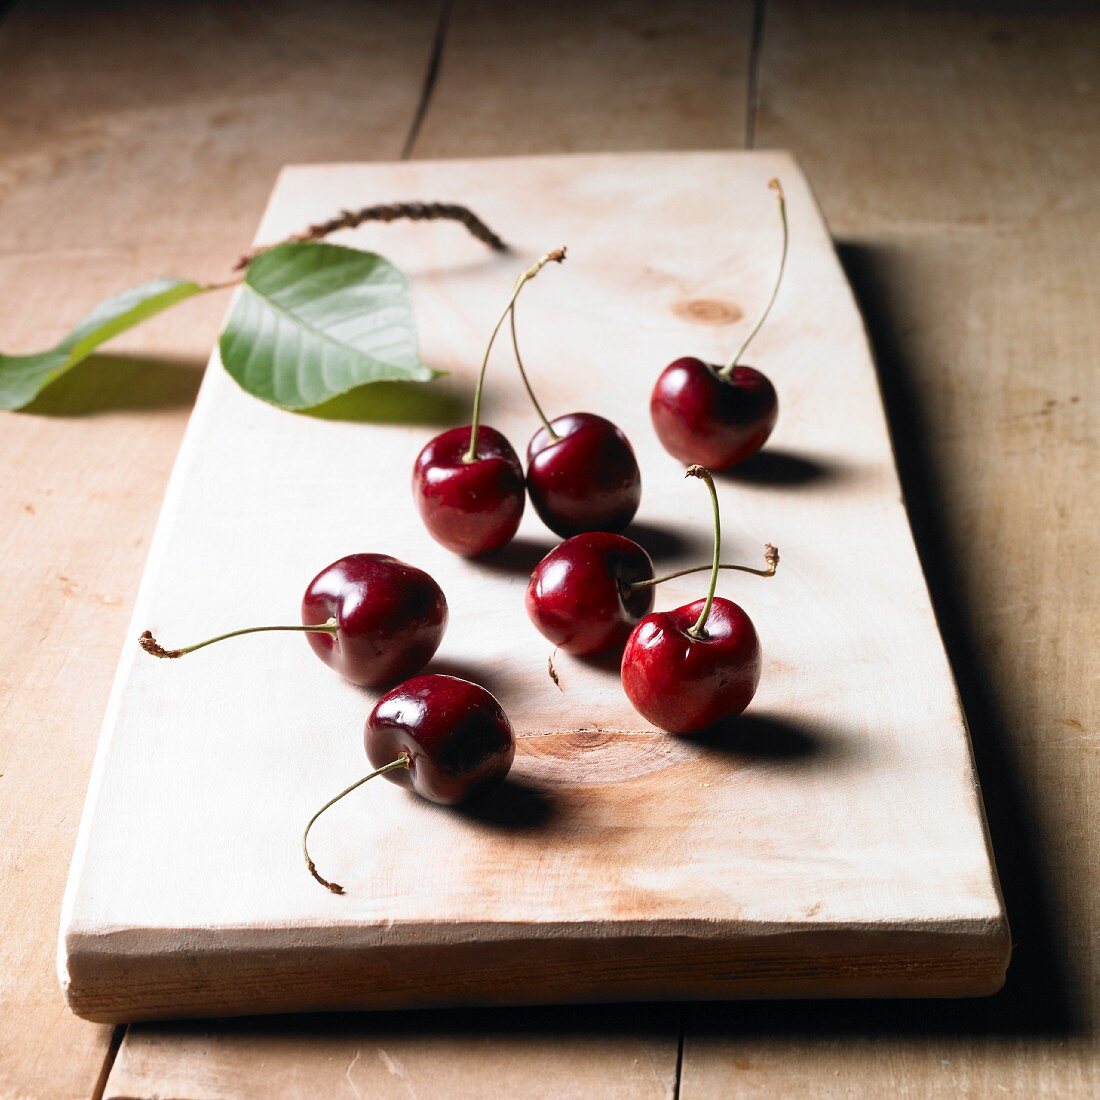 Cherries on a wooden board